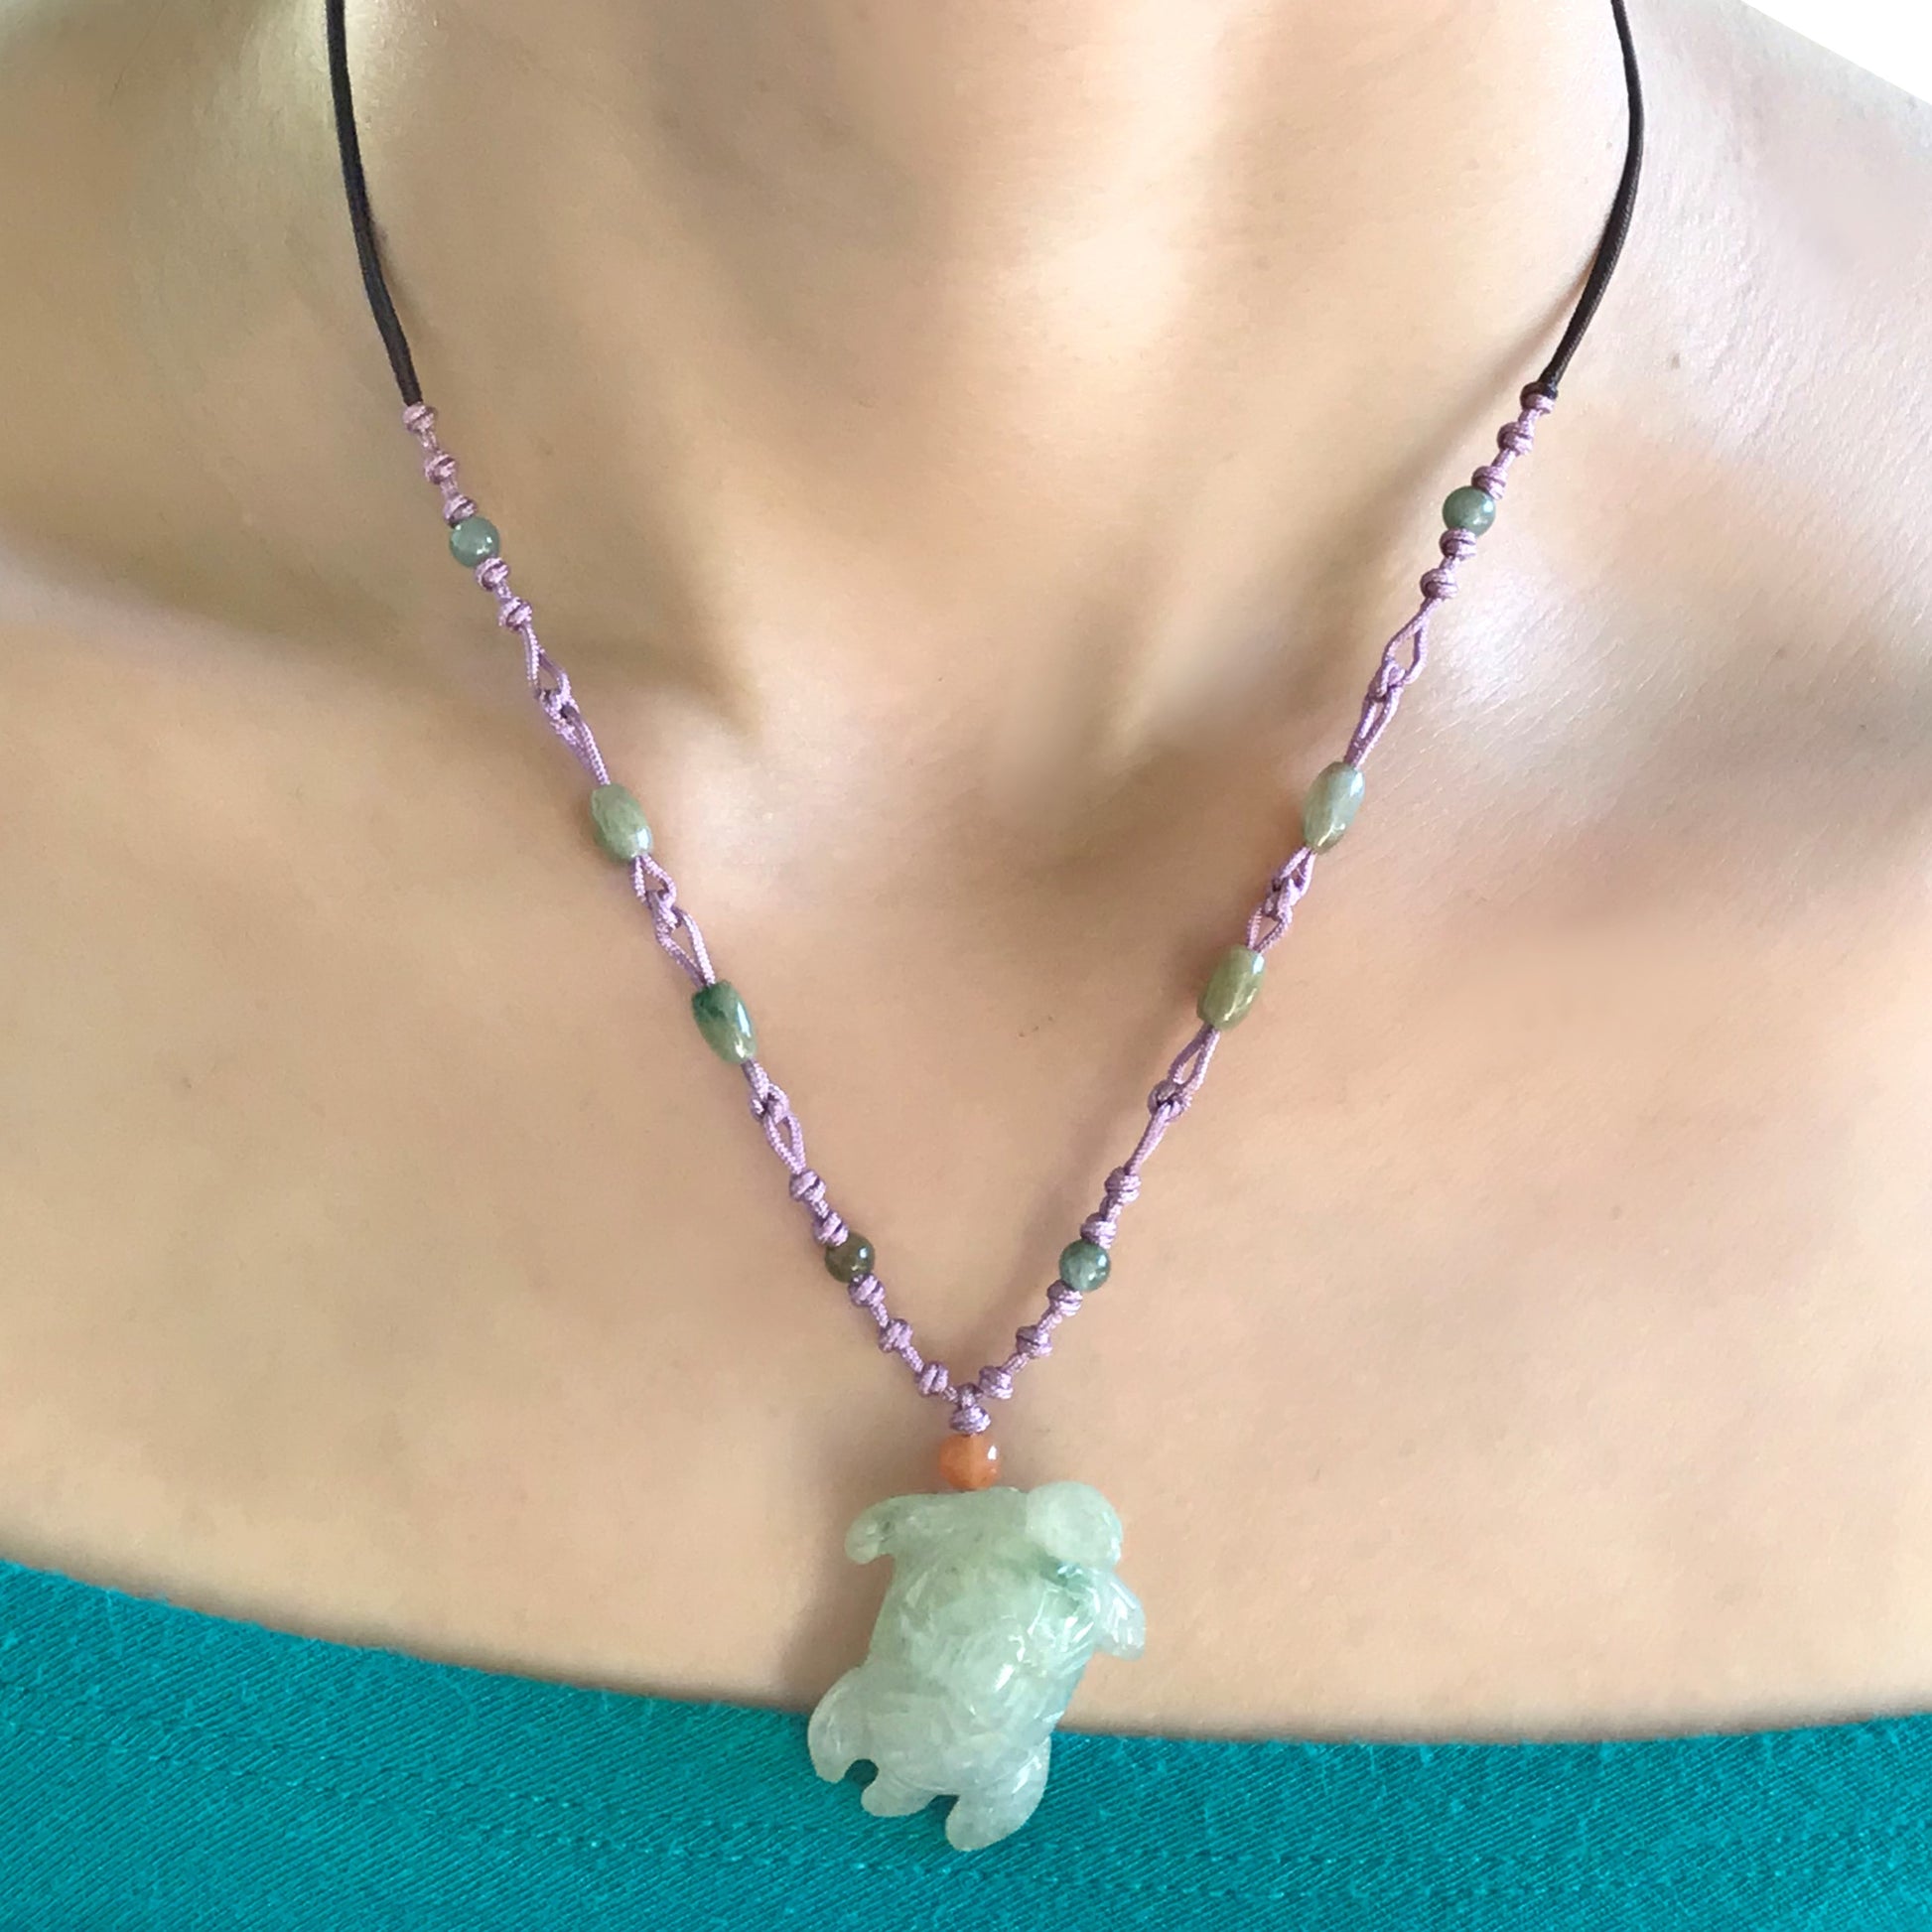 Get Good Luck and Spirituality with Turtle Jade Necklace made with Lavender Cord